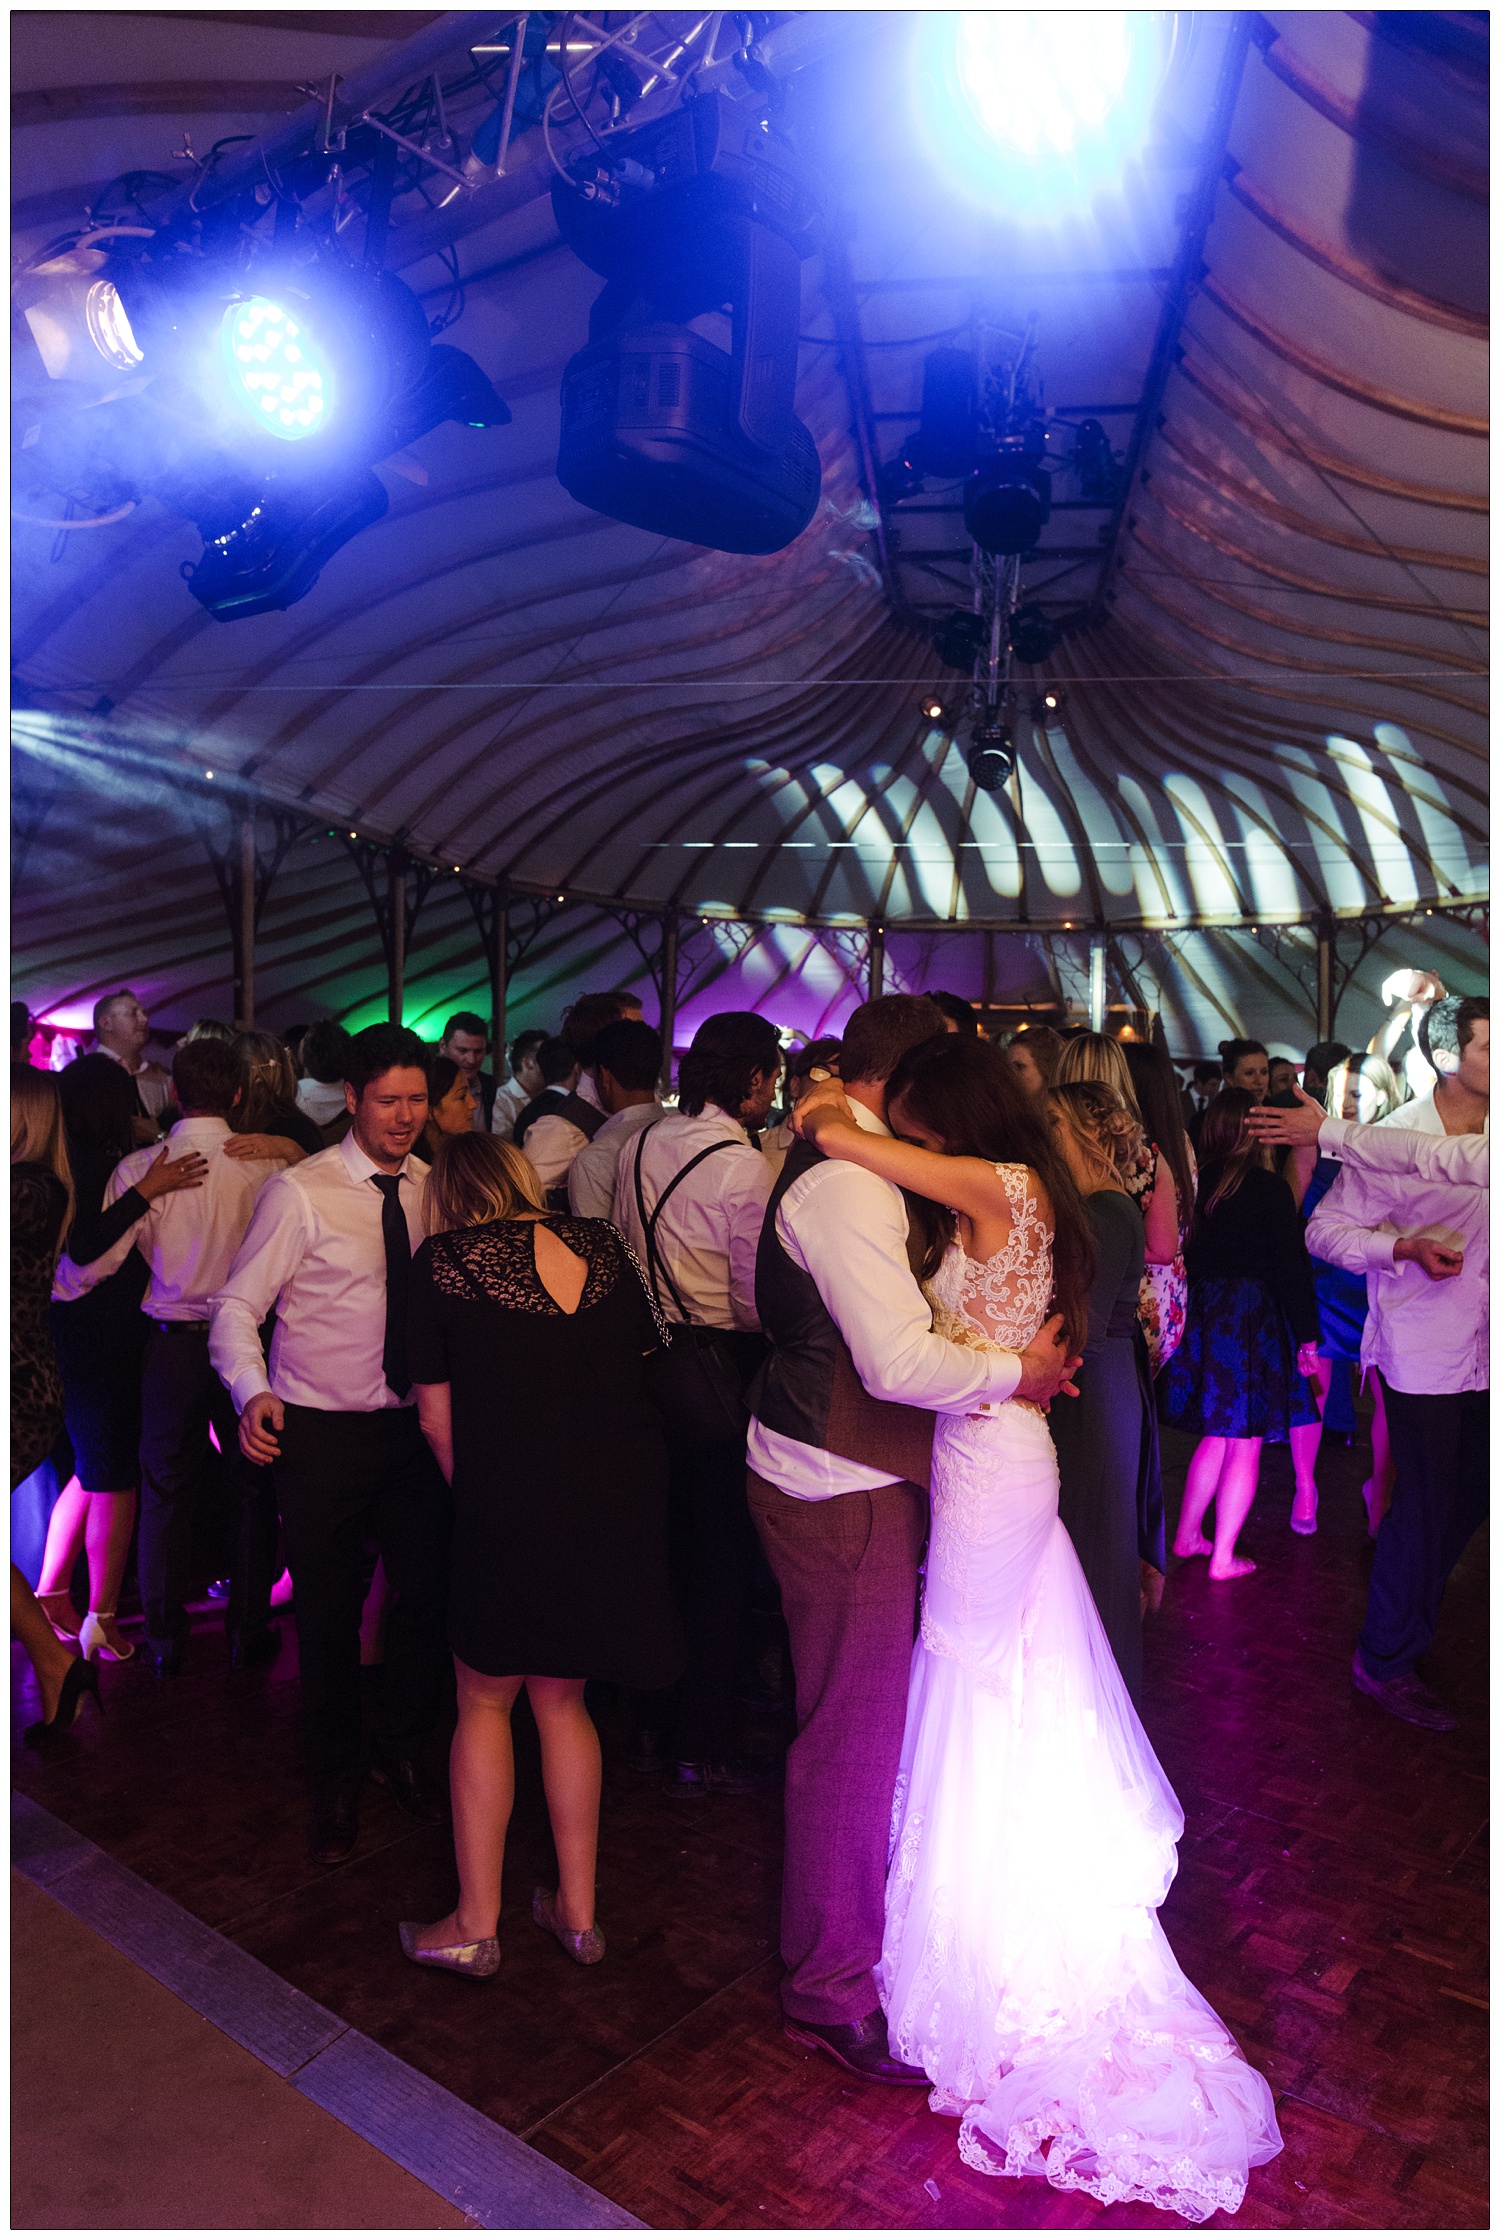 Bride and groom hold each other on the dancefloor whilst surrounded by people.